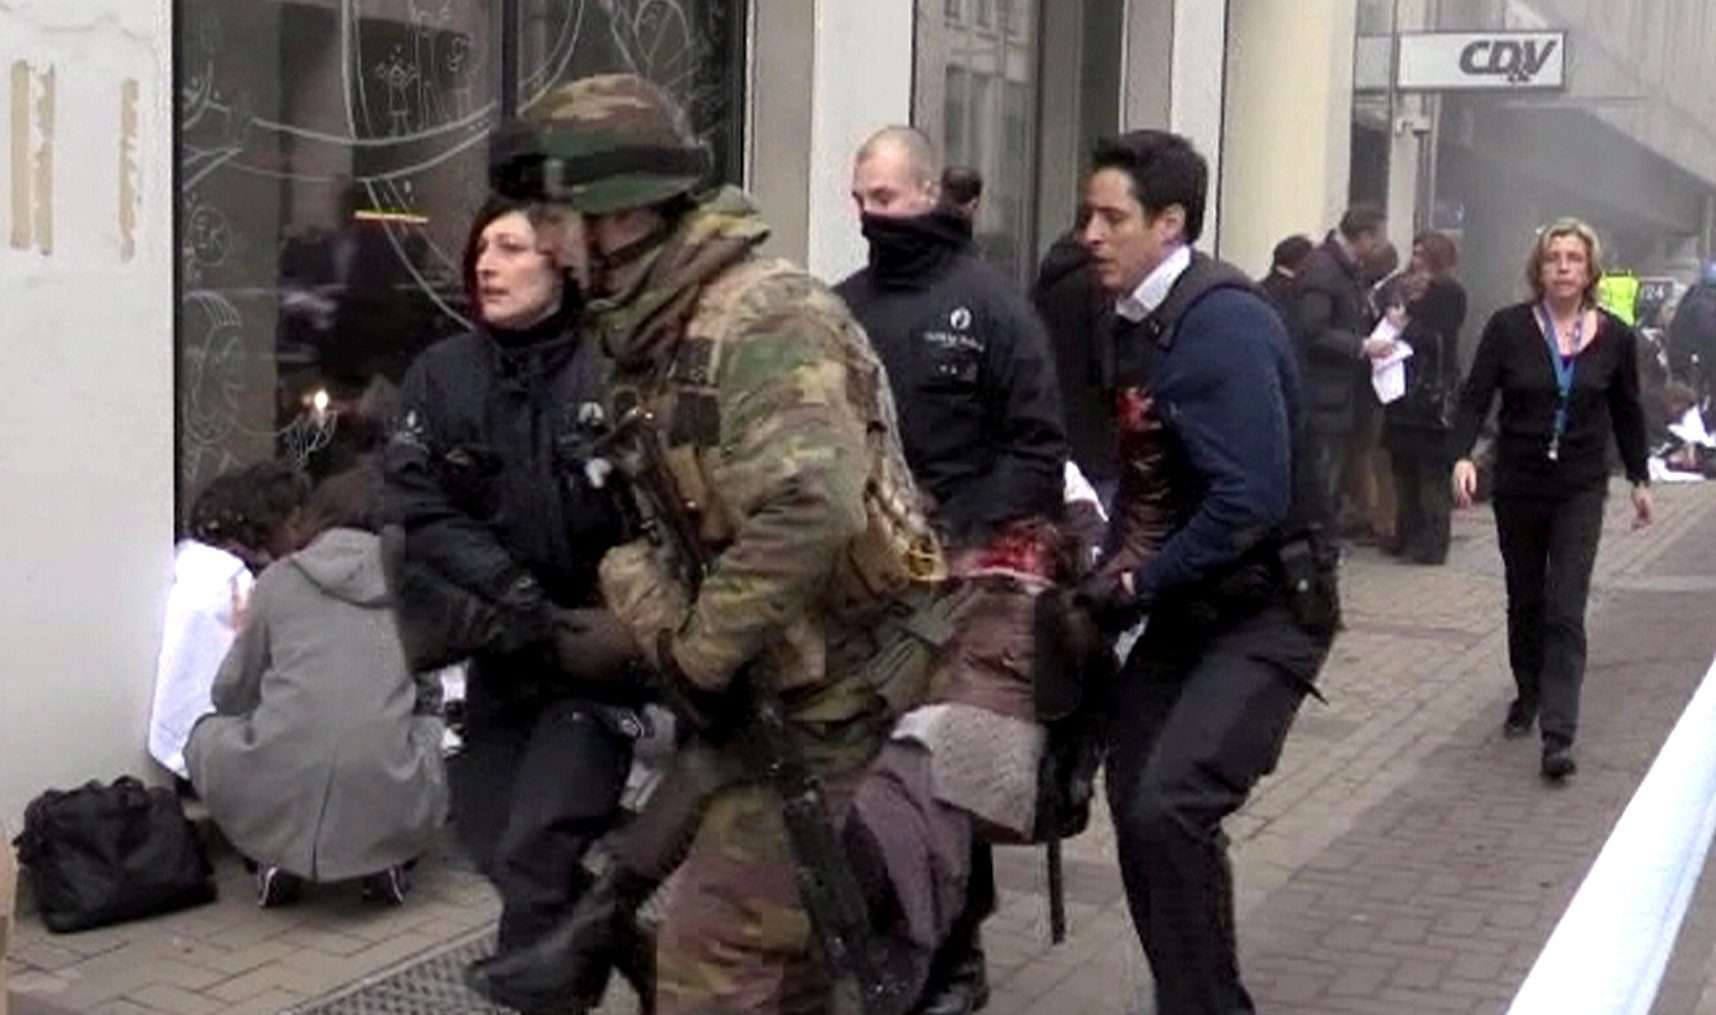 Belgian policemen and a soldier carrying an injured person after the March 22 terrorist attack on the Maelbeek Metro station in Brussels, Belgium. Photo: EPA